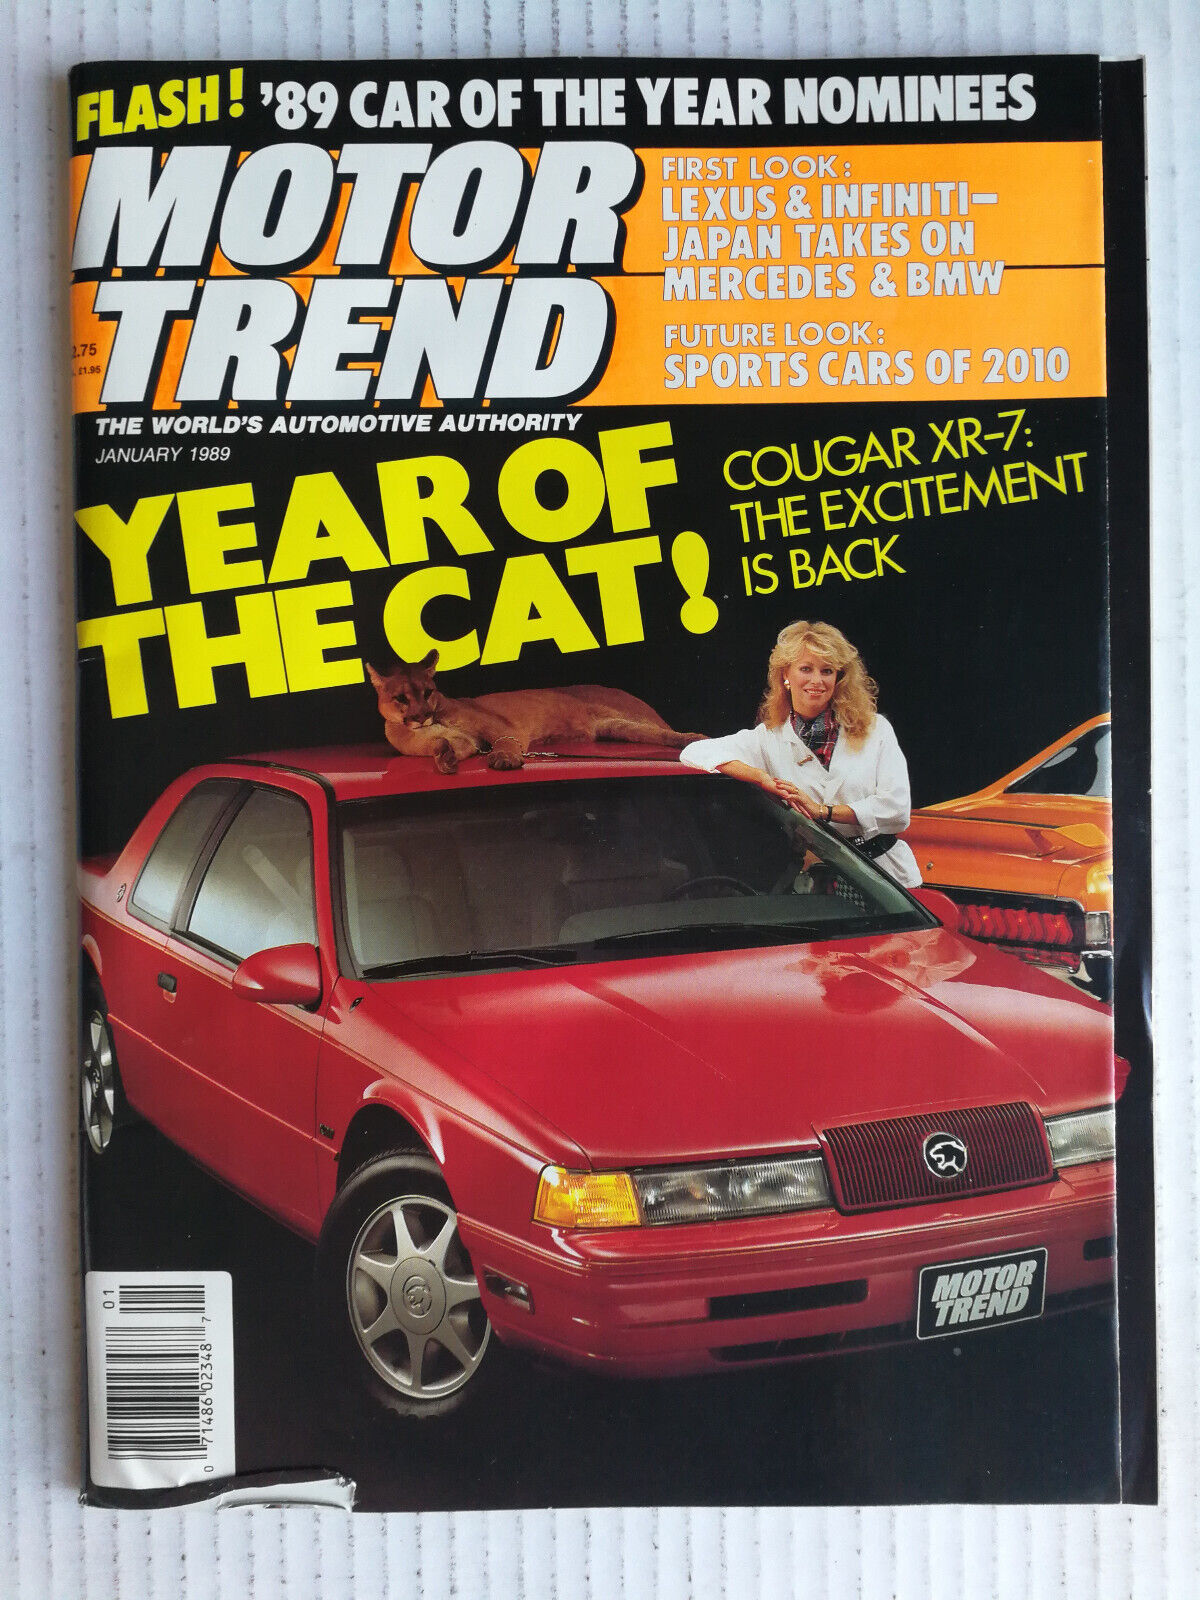 Motor Trend Magazine 1989 - The Complete Year - All 12 Issues